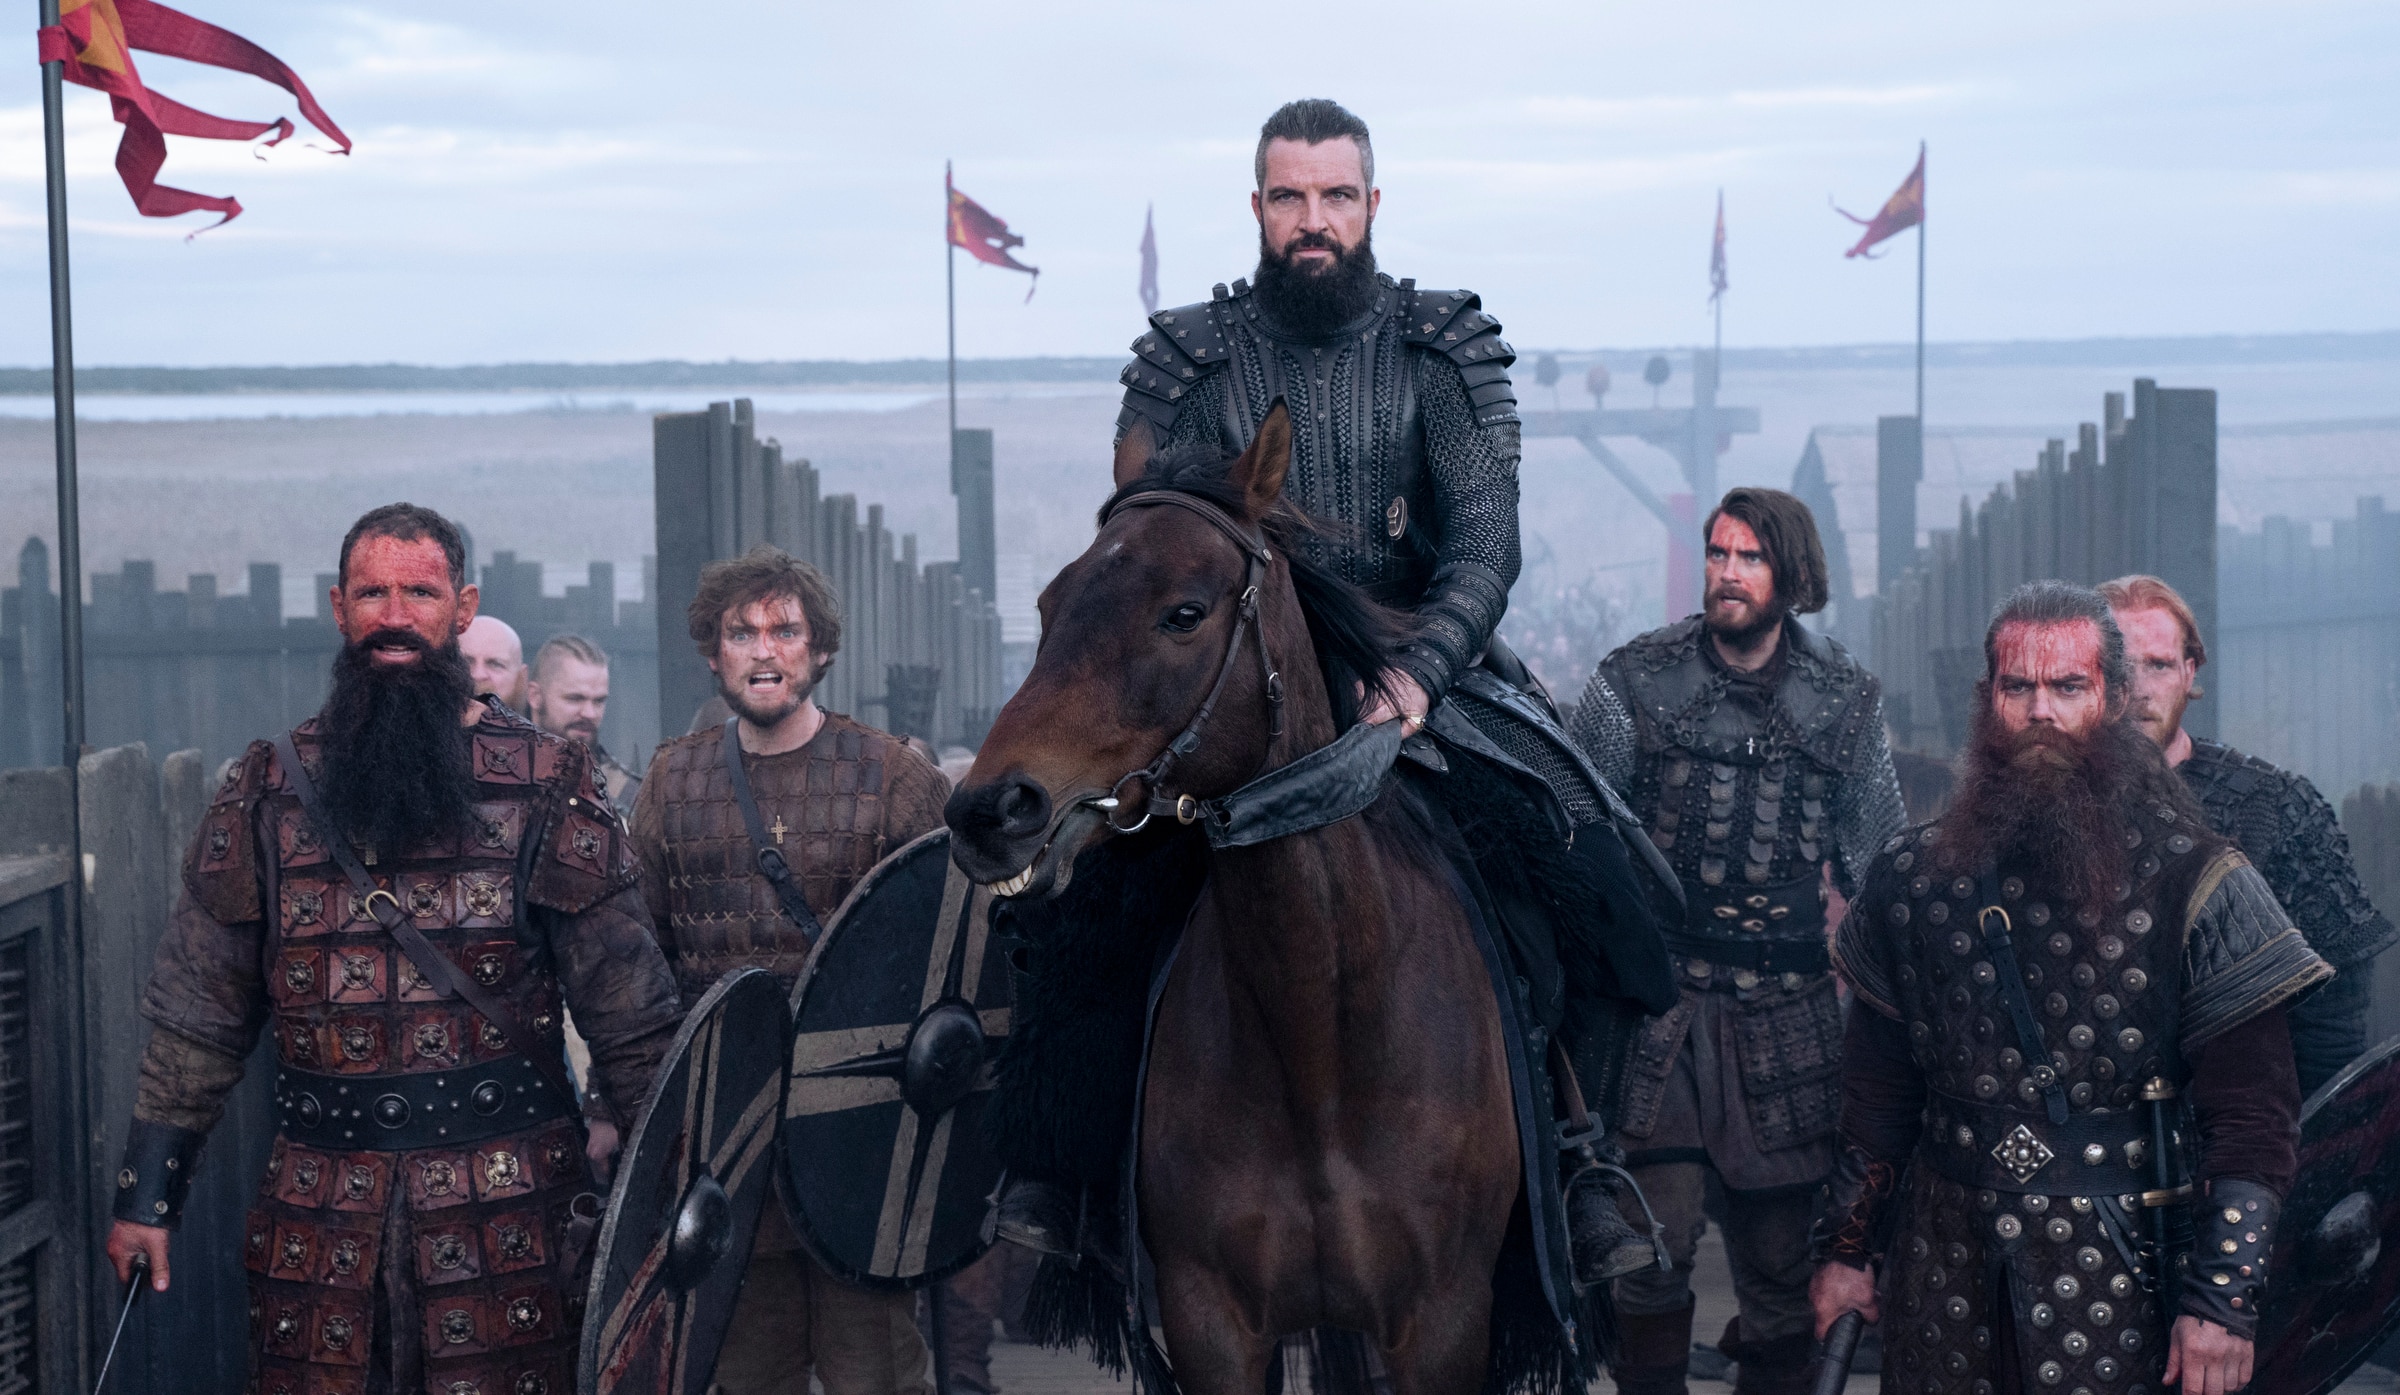 Vikings: Valhalla Cast, News, Videos and more